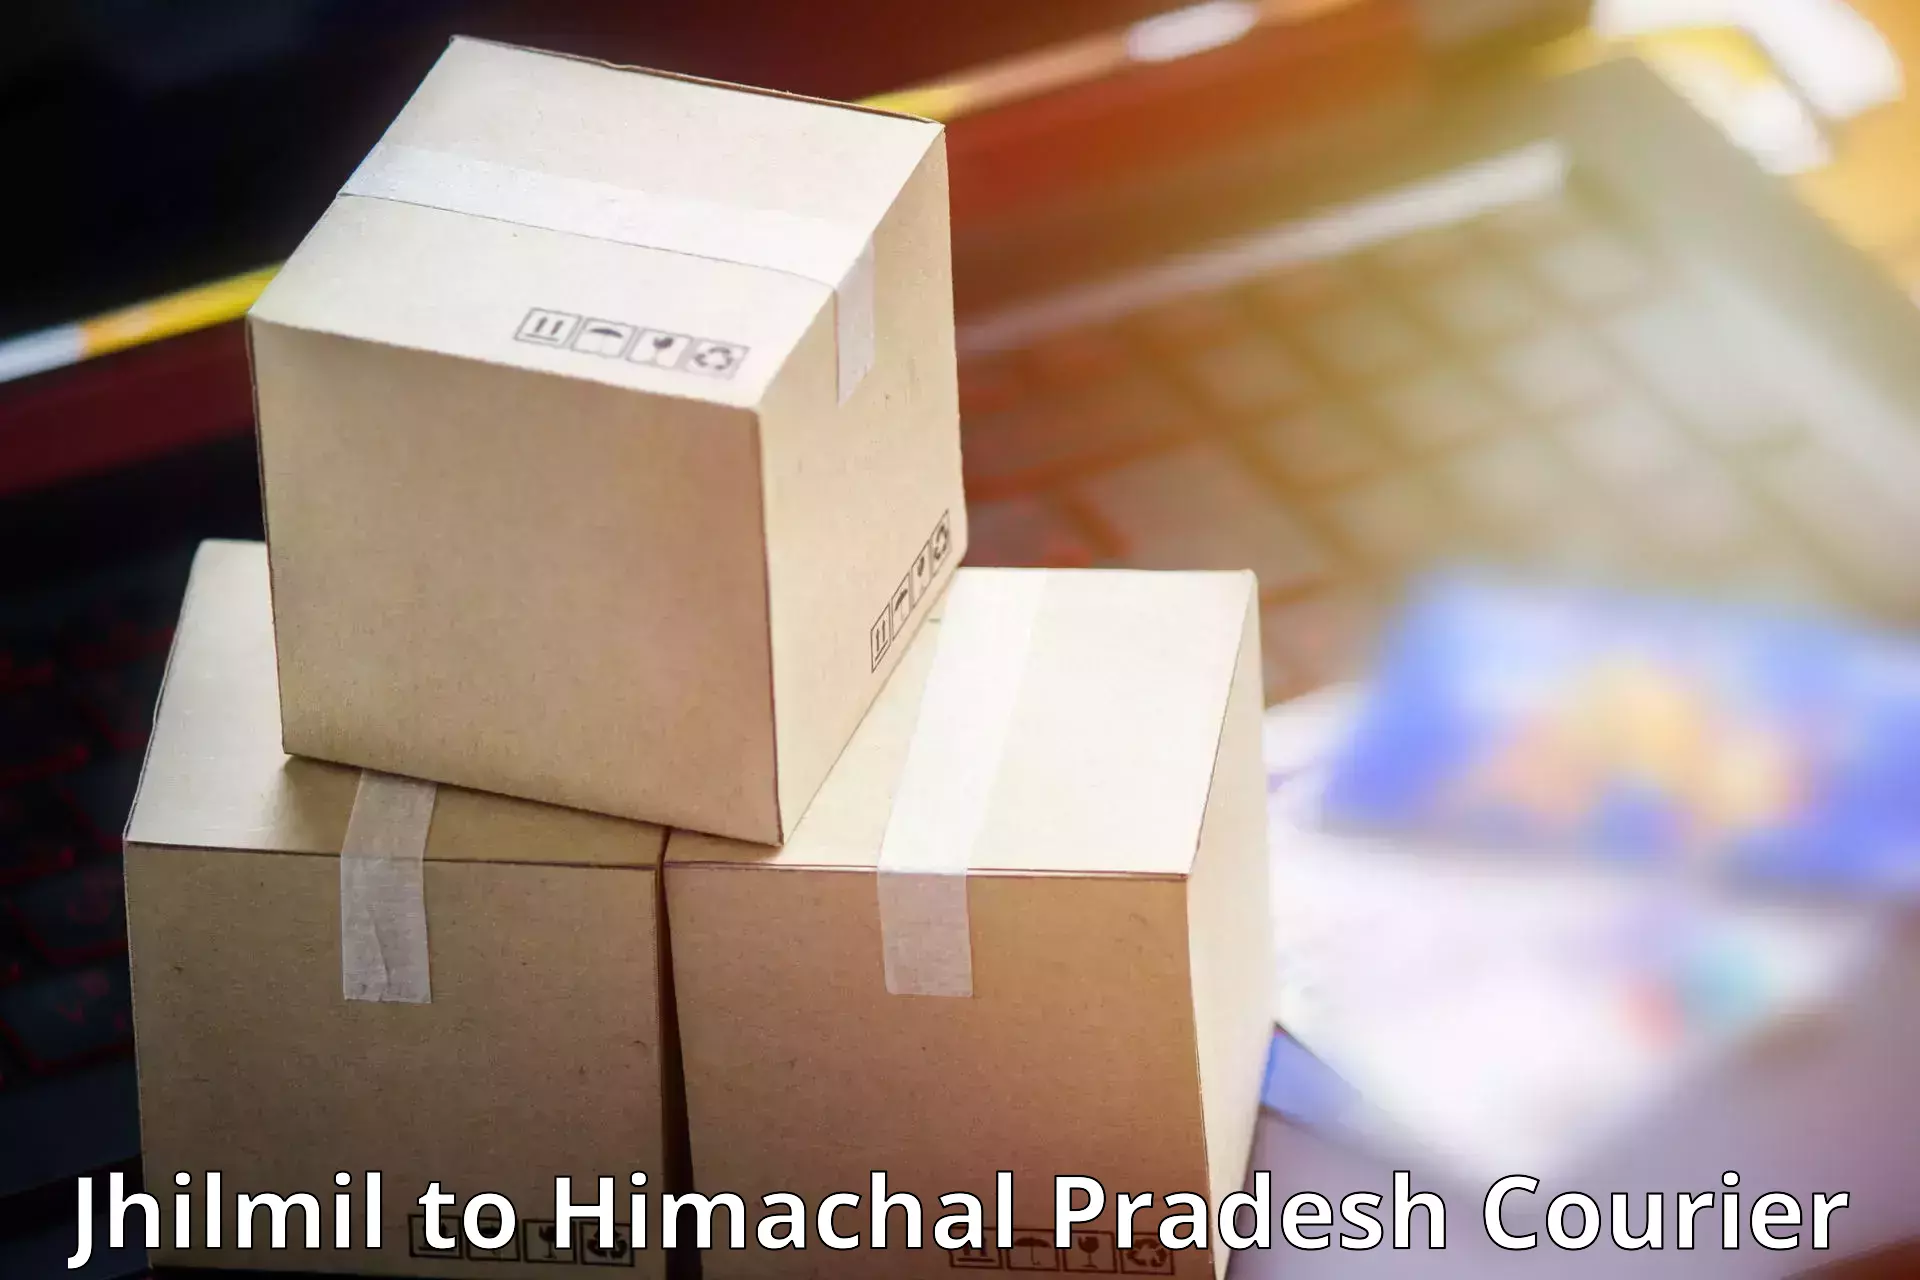 Modern courier technology Jhilmil to Darlaghat